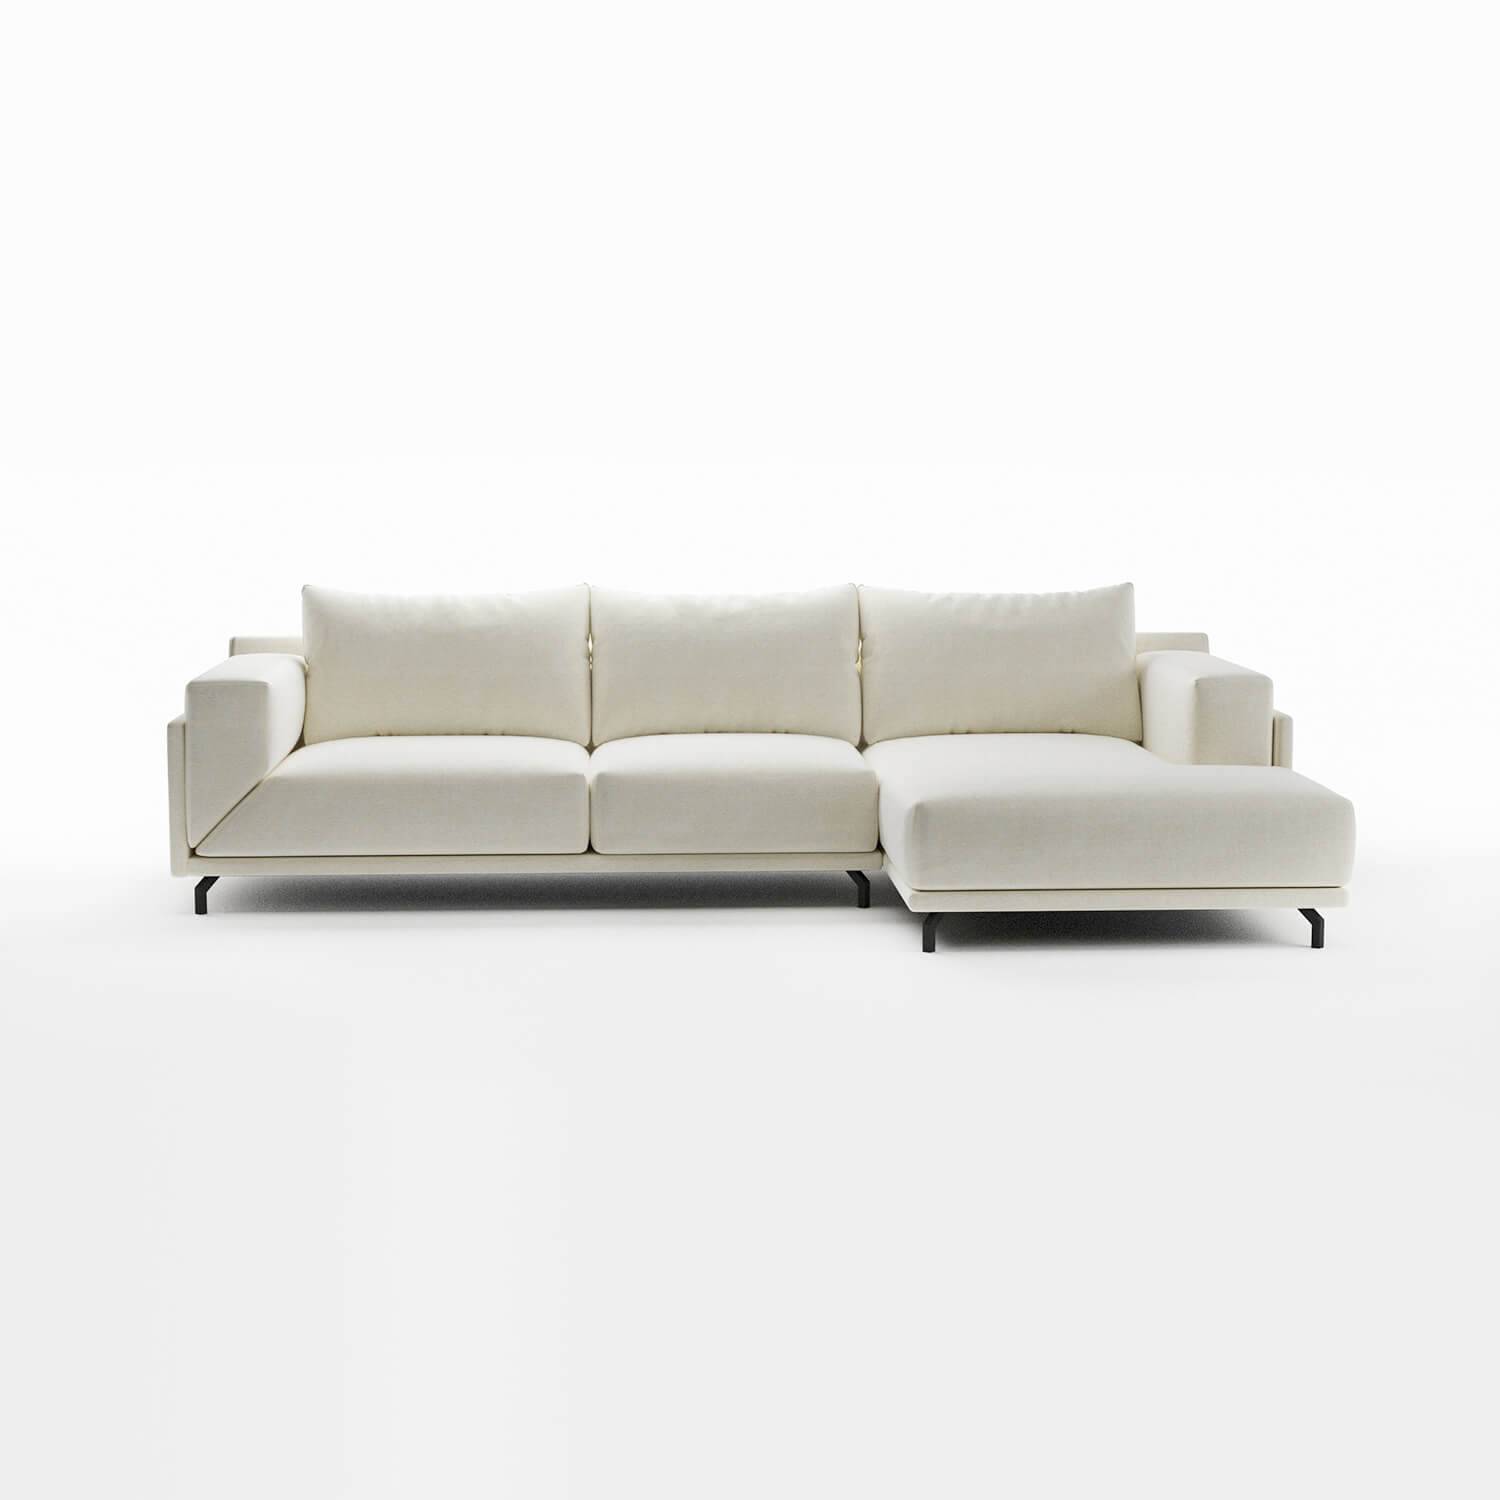 tyler l shaped sofa with right chaise lounge